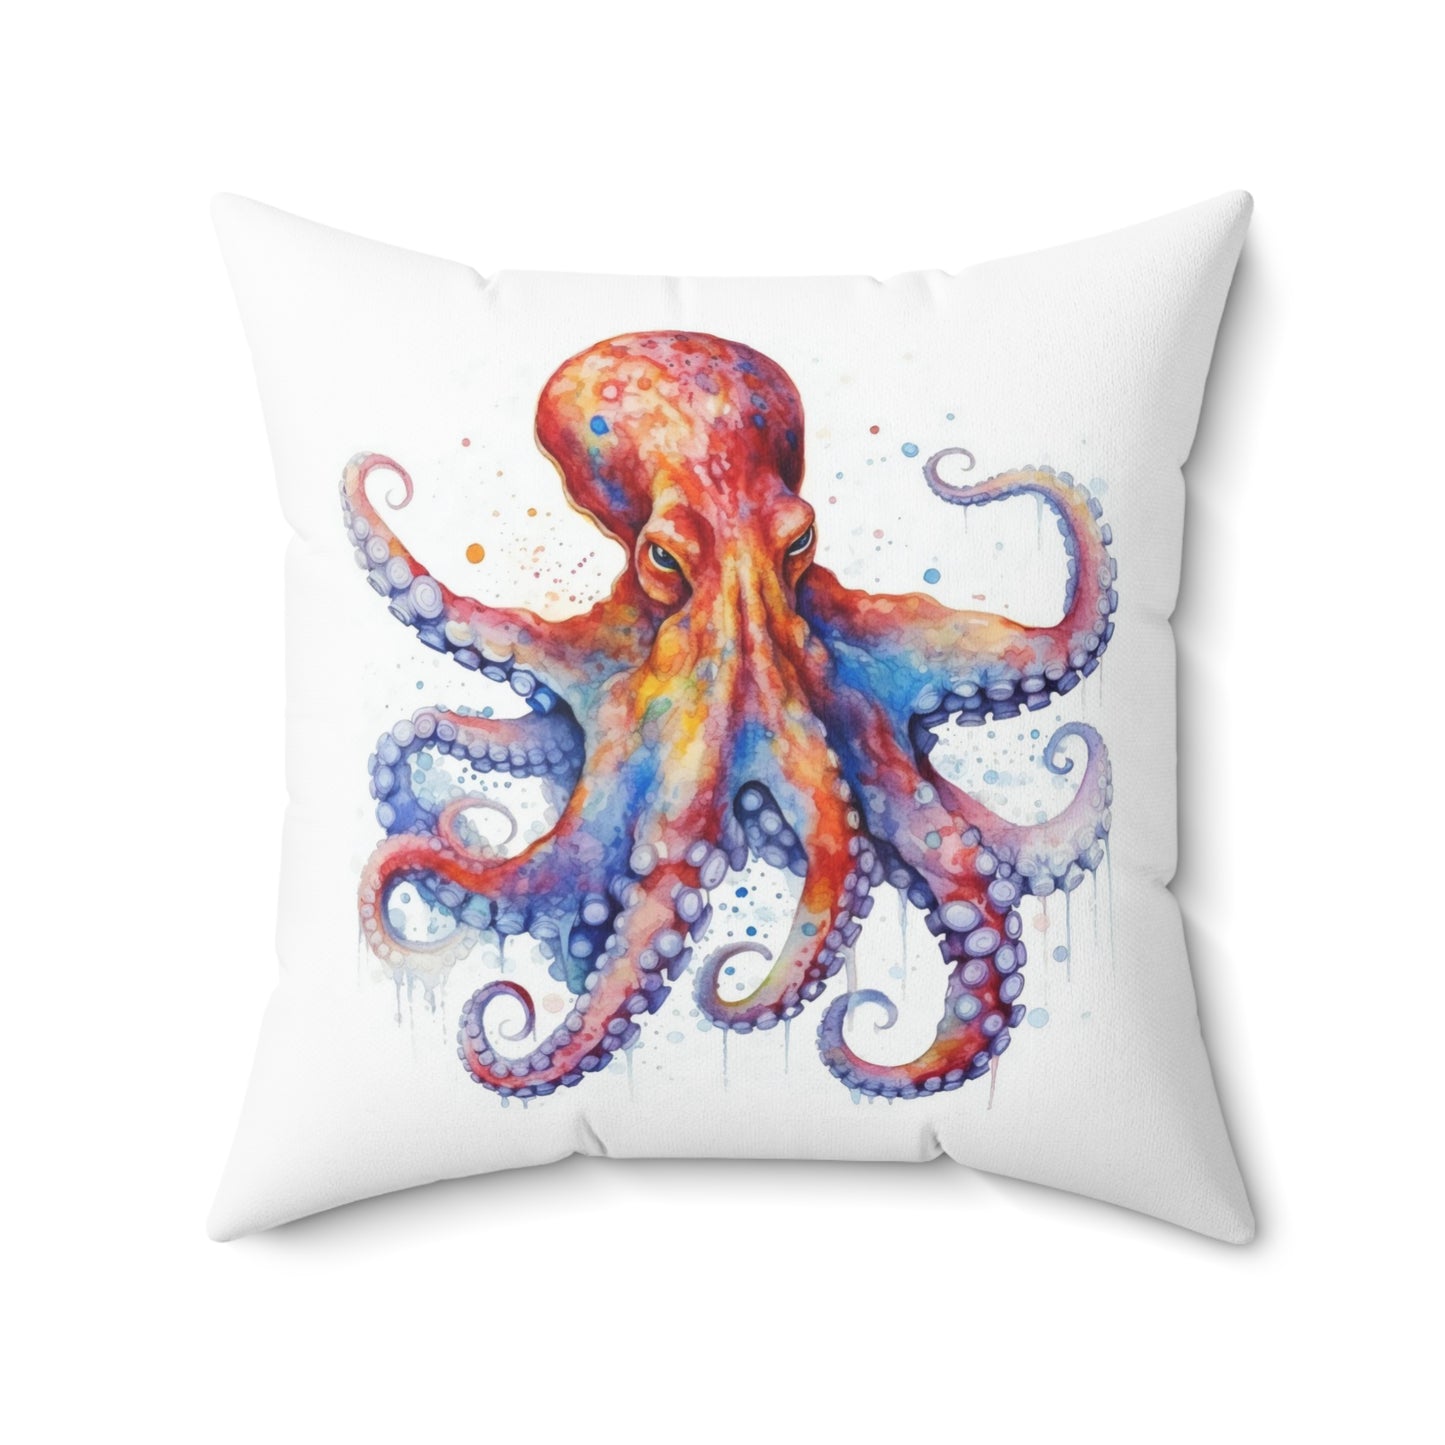 Octopus Throw Pillow, Watercolor Octopus Decorative Pillow, Square Nautical Pillow, Double Sided Accent Cushion, Concealed Zipper